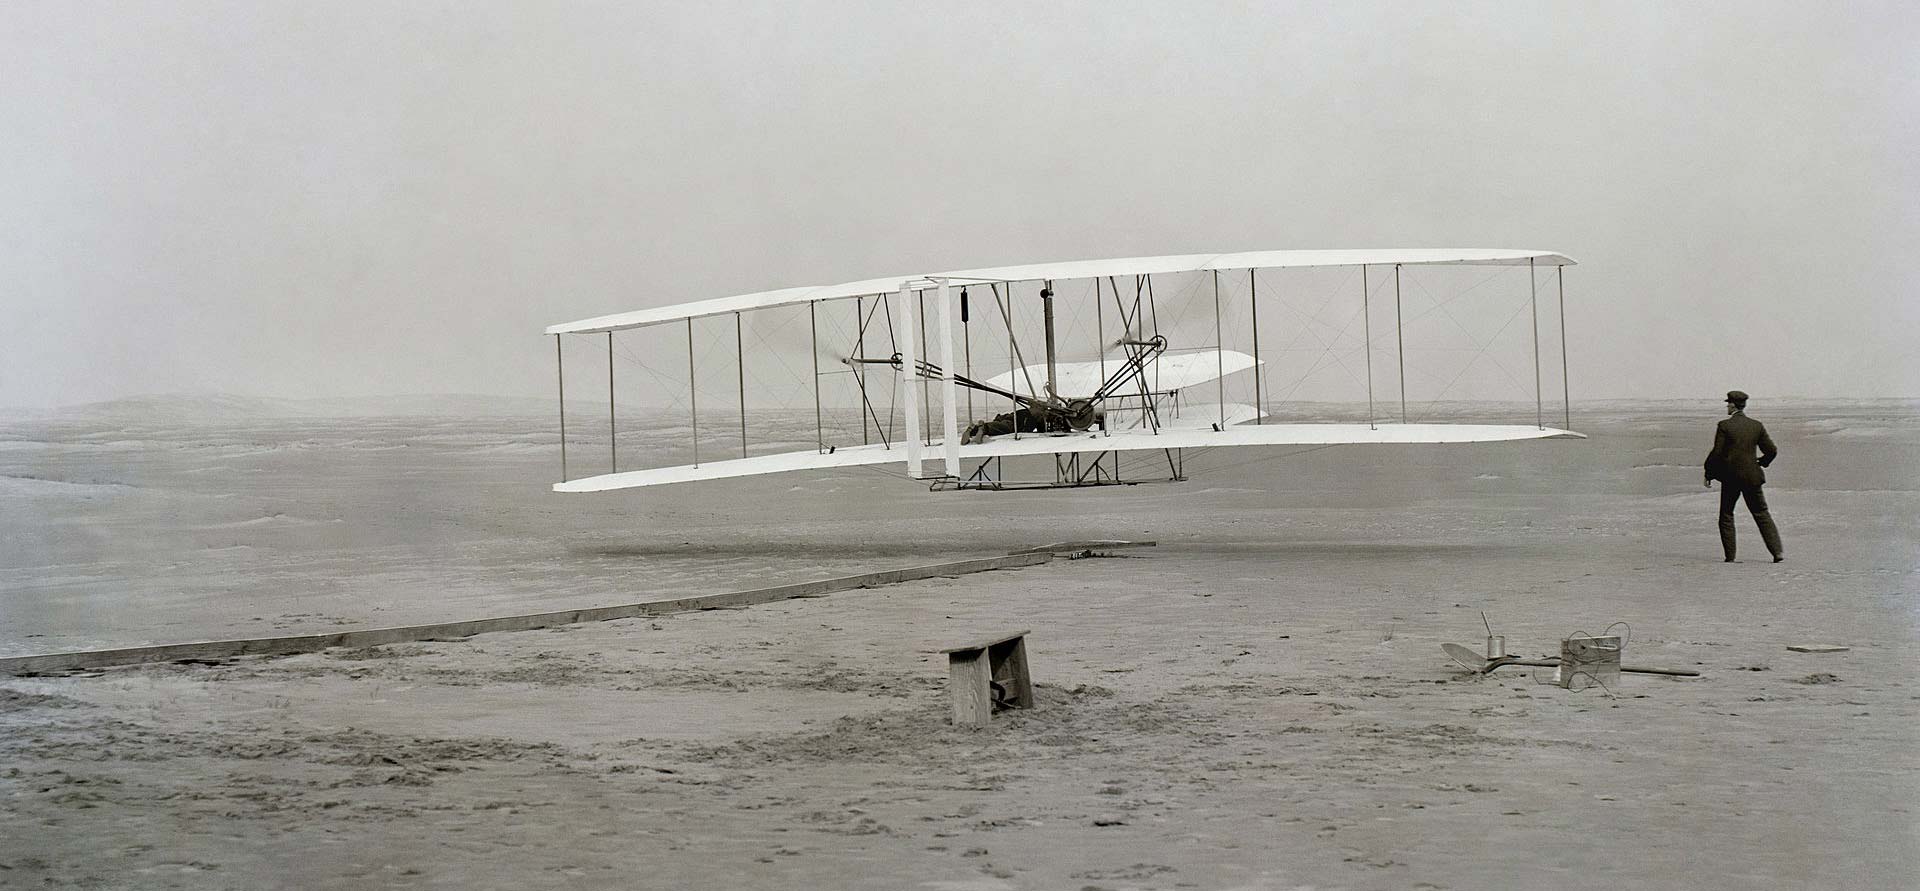 First successful flight of the Wright Flyer I, 1903